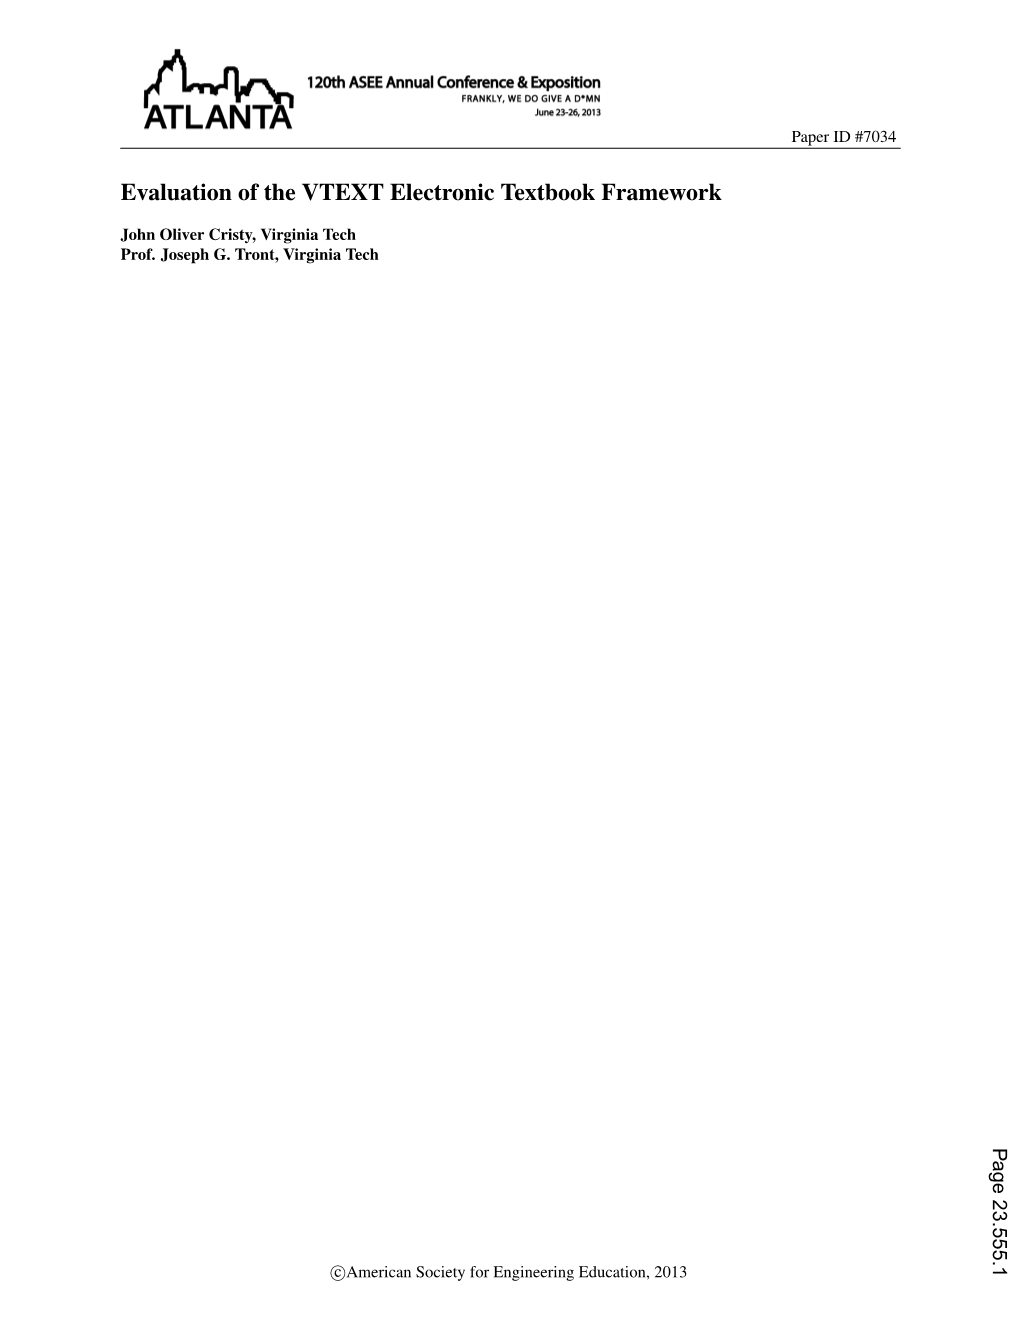 Evaluation of the VTEXT Electronic Textbook Framework